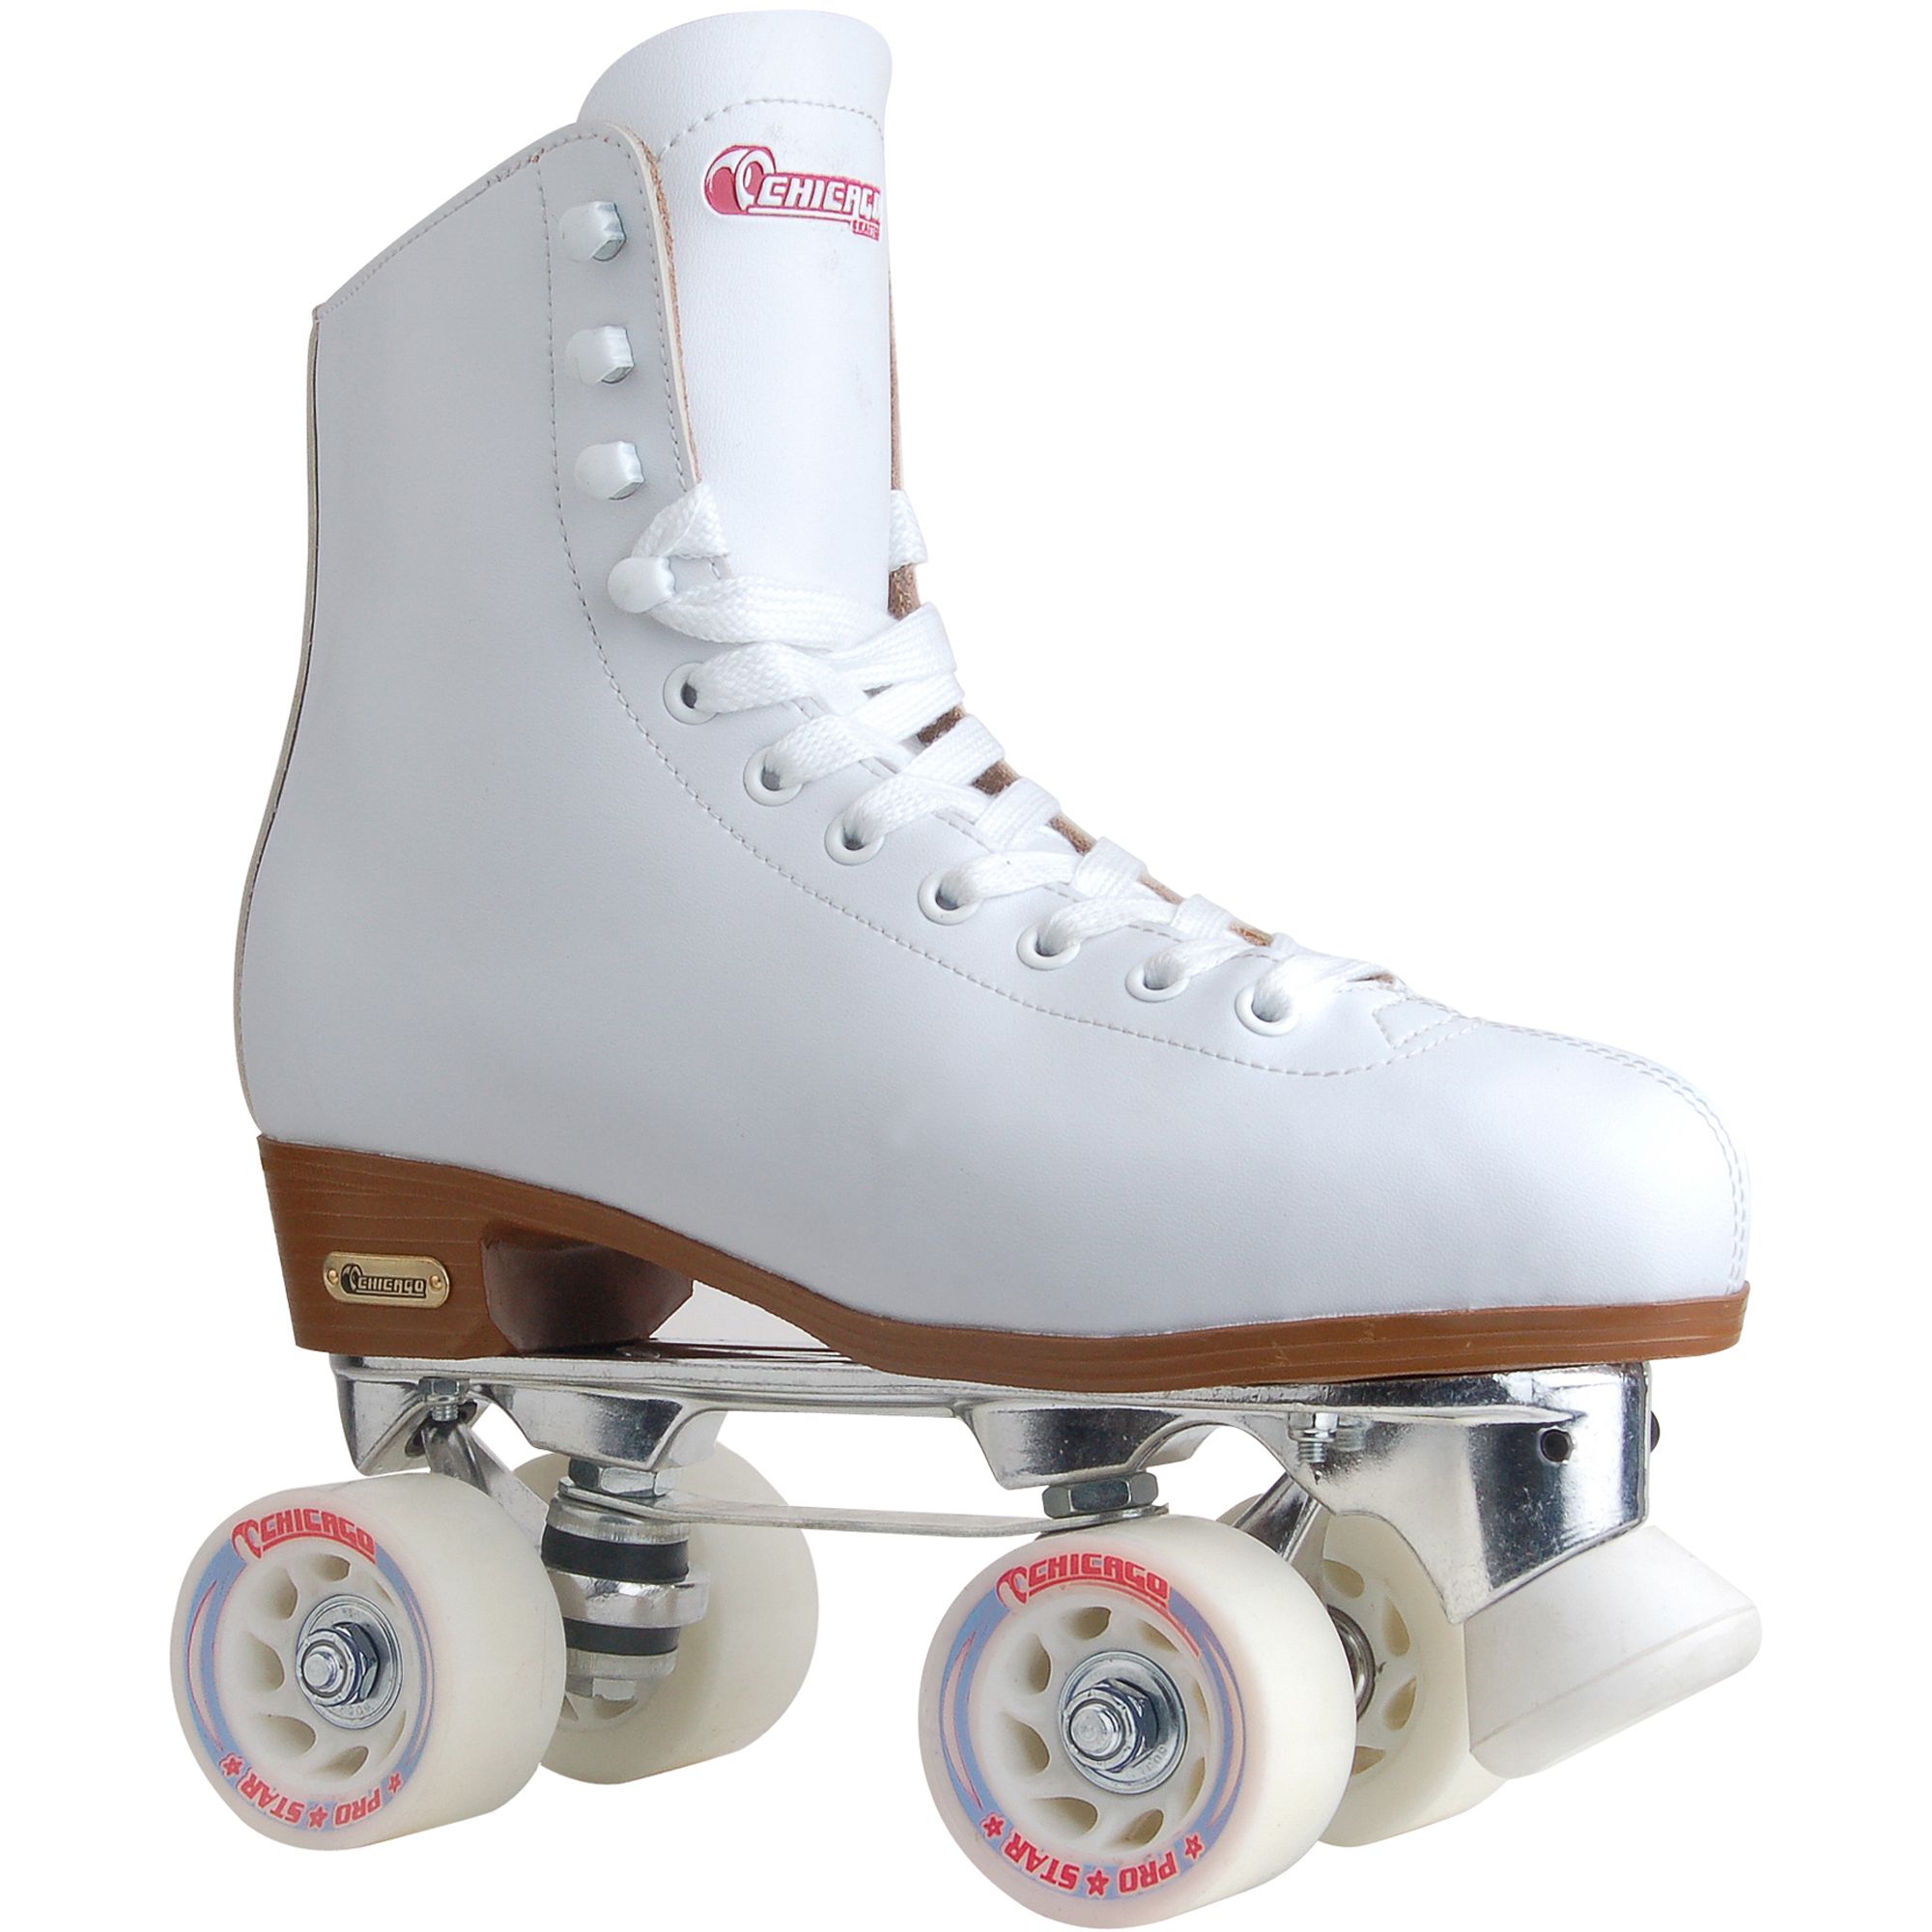 Ladies Leather Lined Rink Skate White